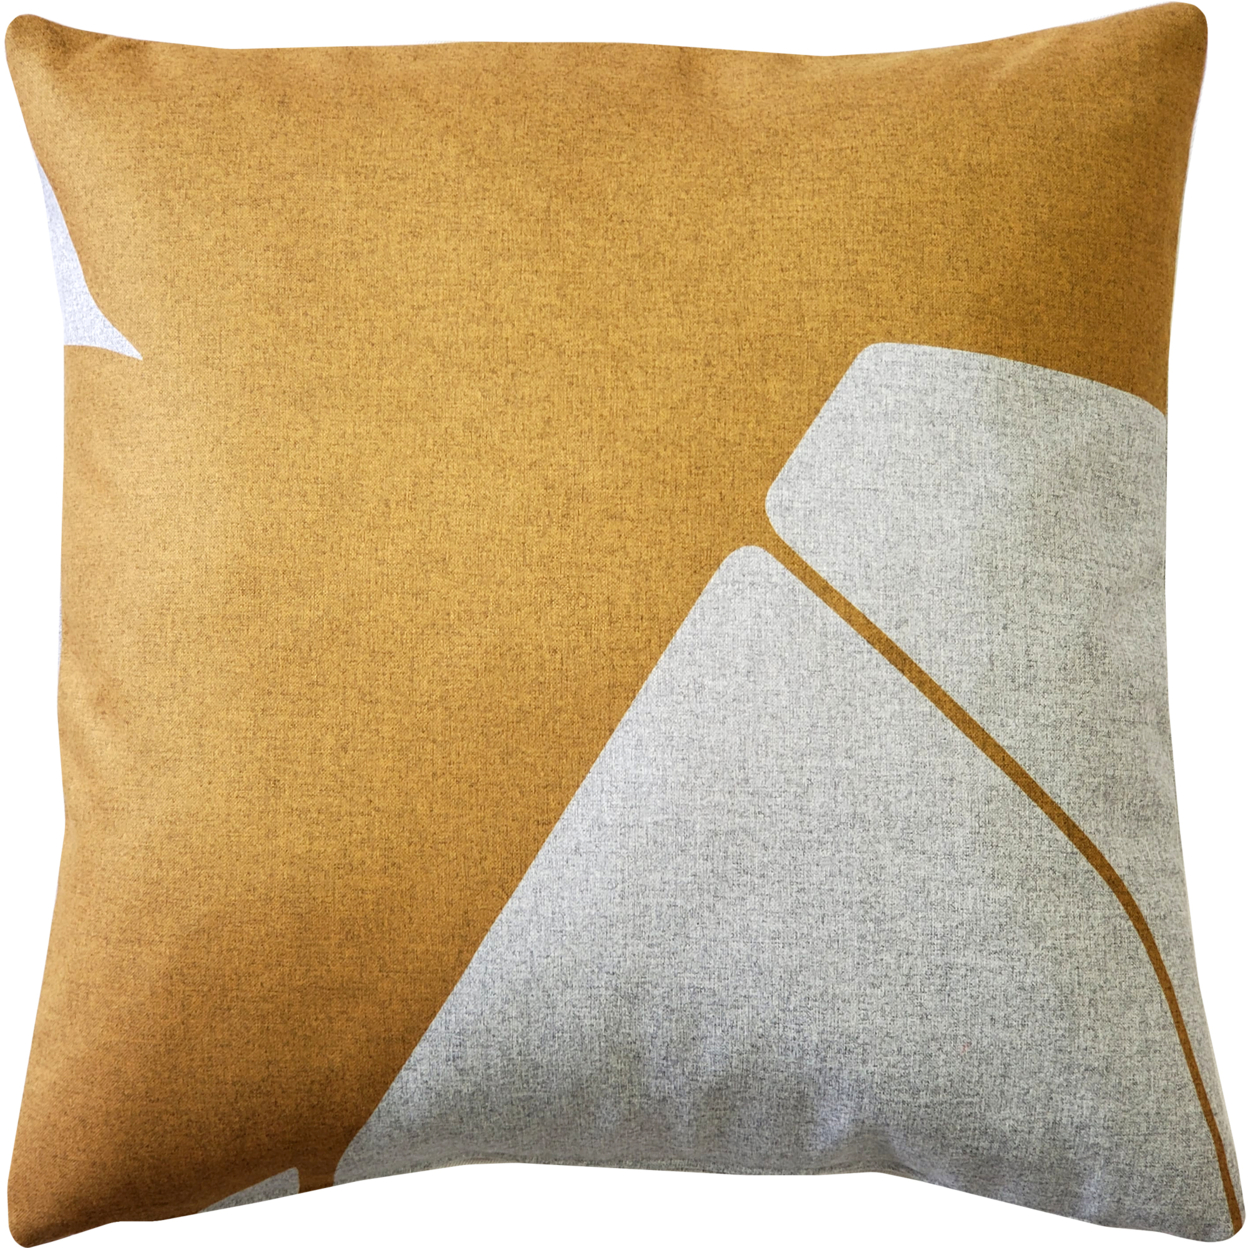 Boketto Renaissance Gold Throw Pillow 19x19 Inches Square, Complete Pillow With Polyfill Pillow Insert